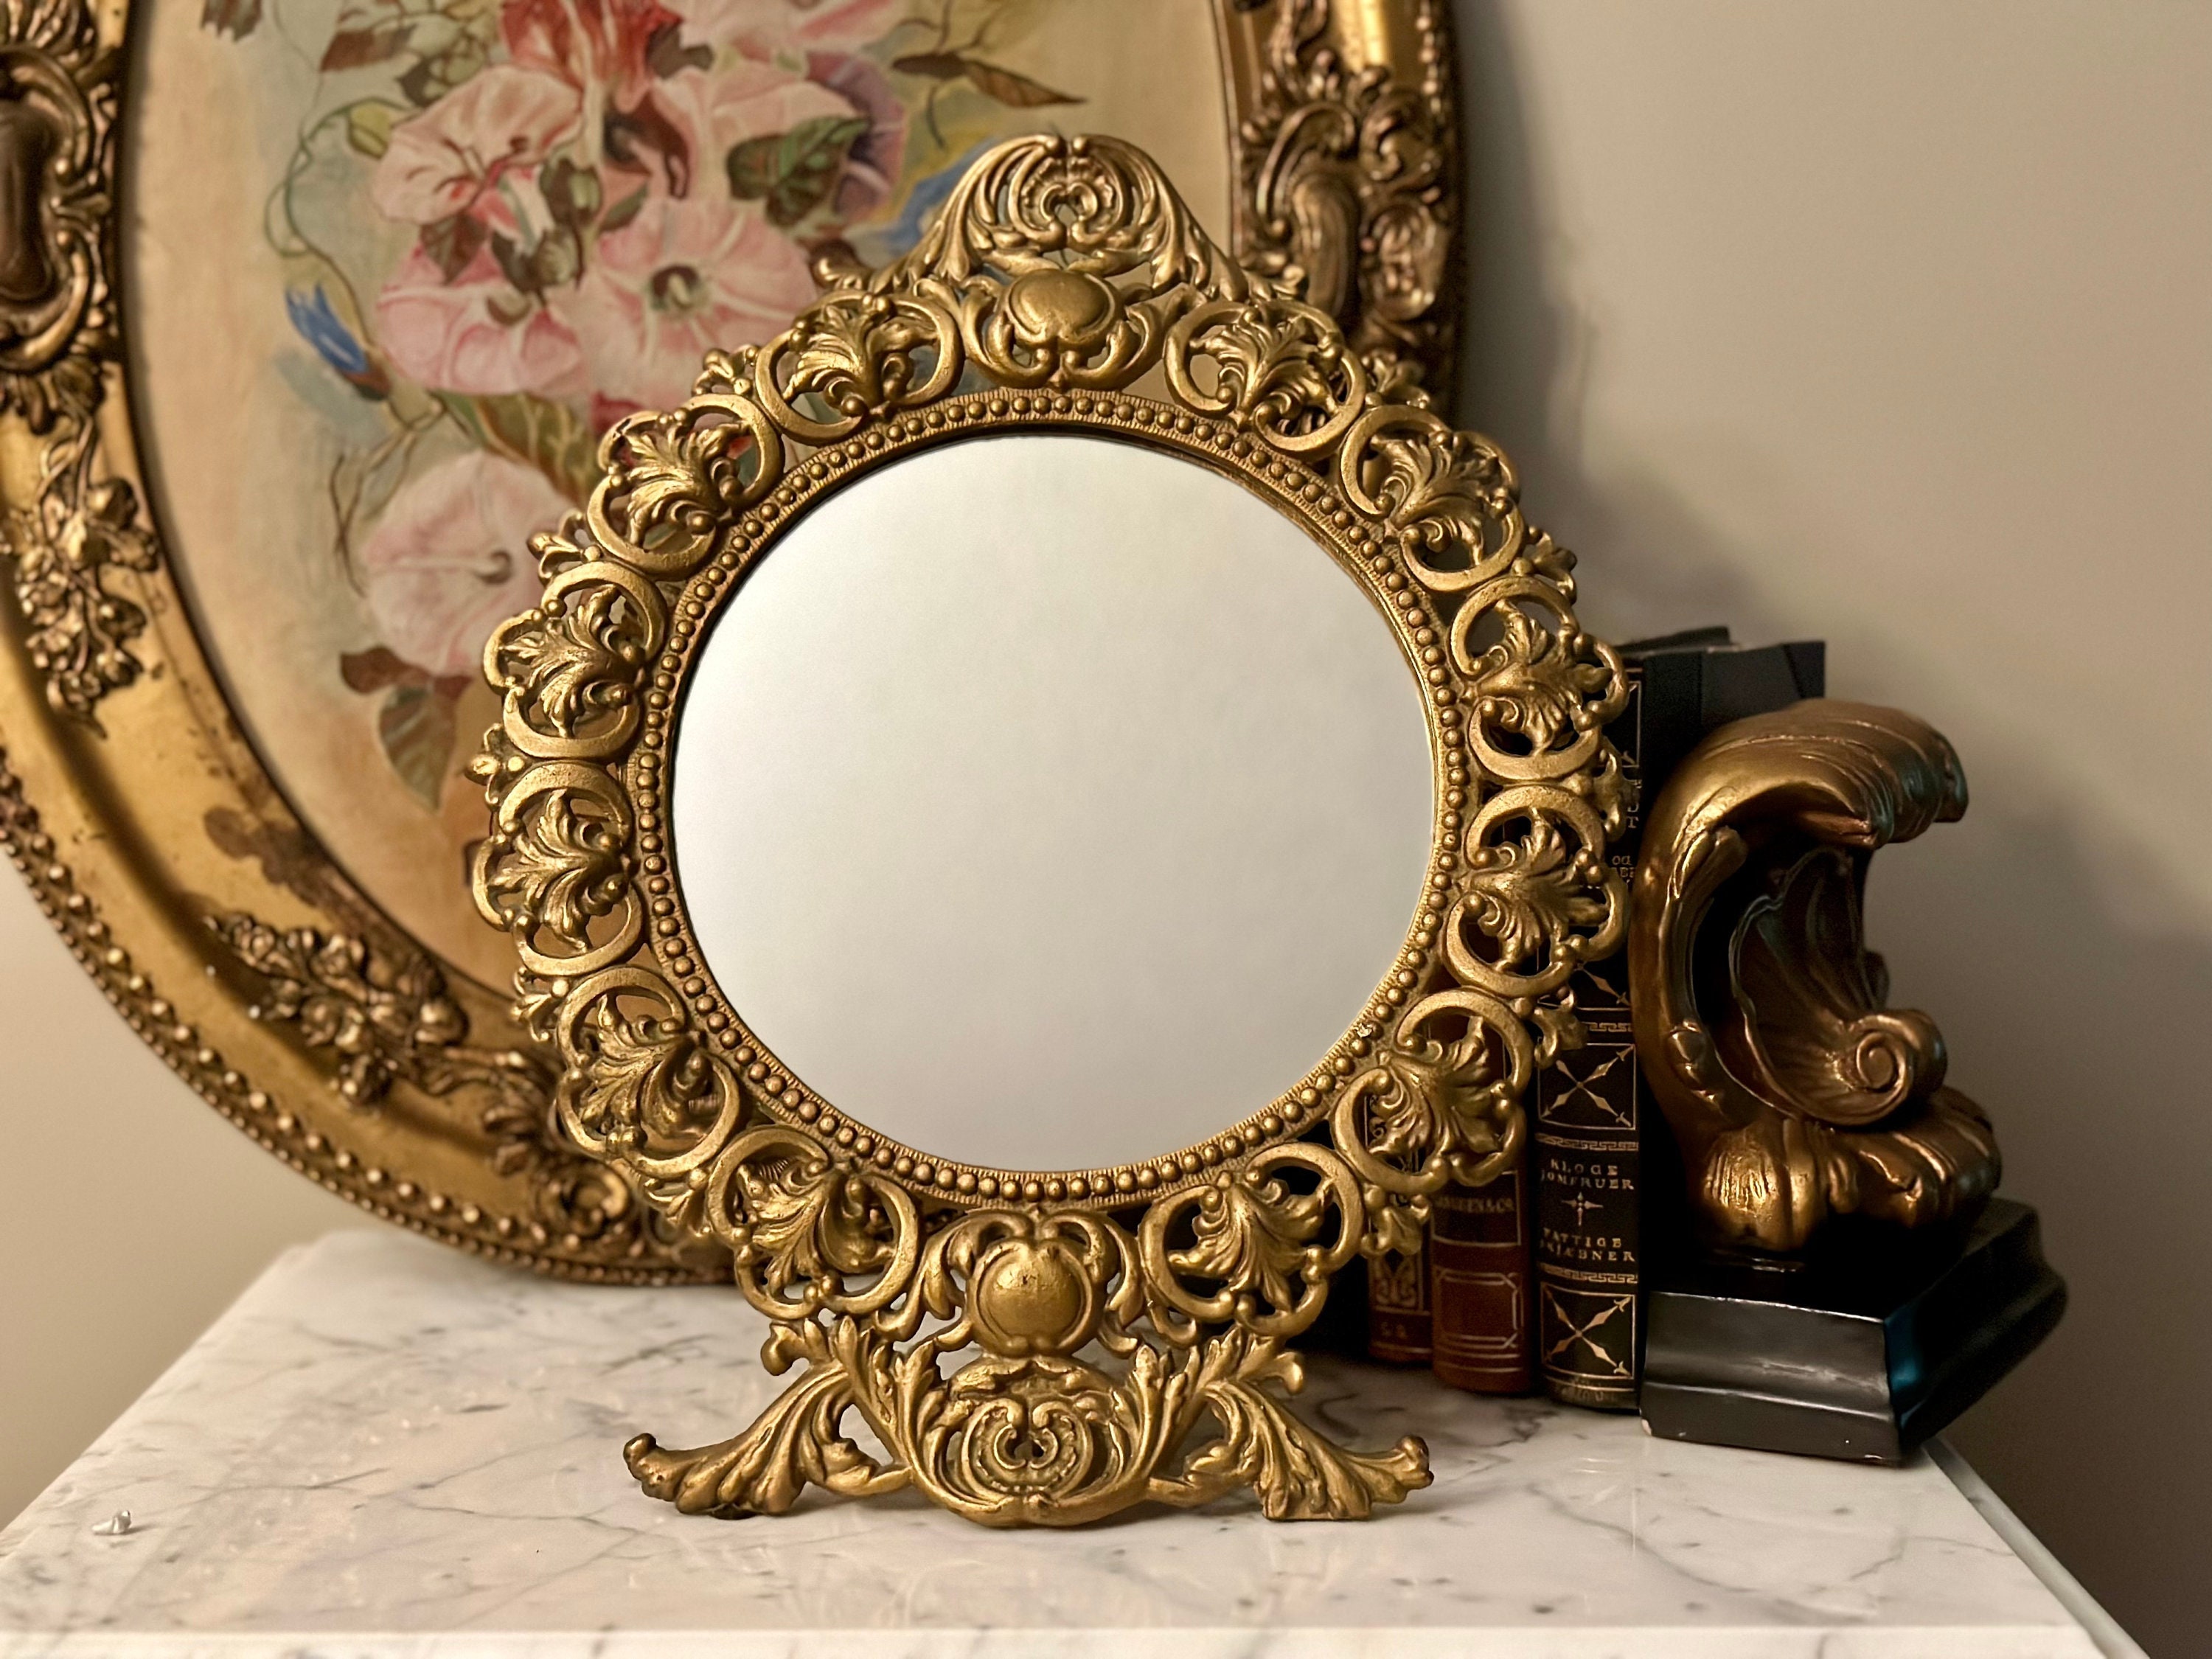 Vintage French Ruffled Bow Wooden Gilded Mirror 